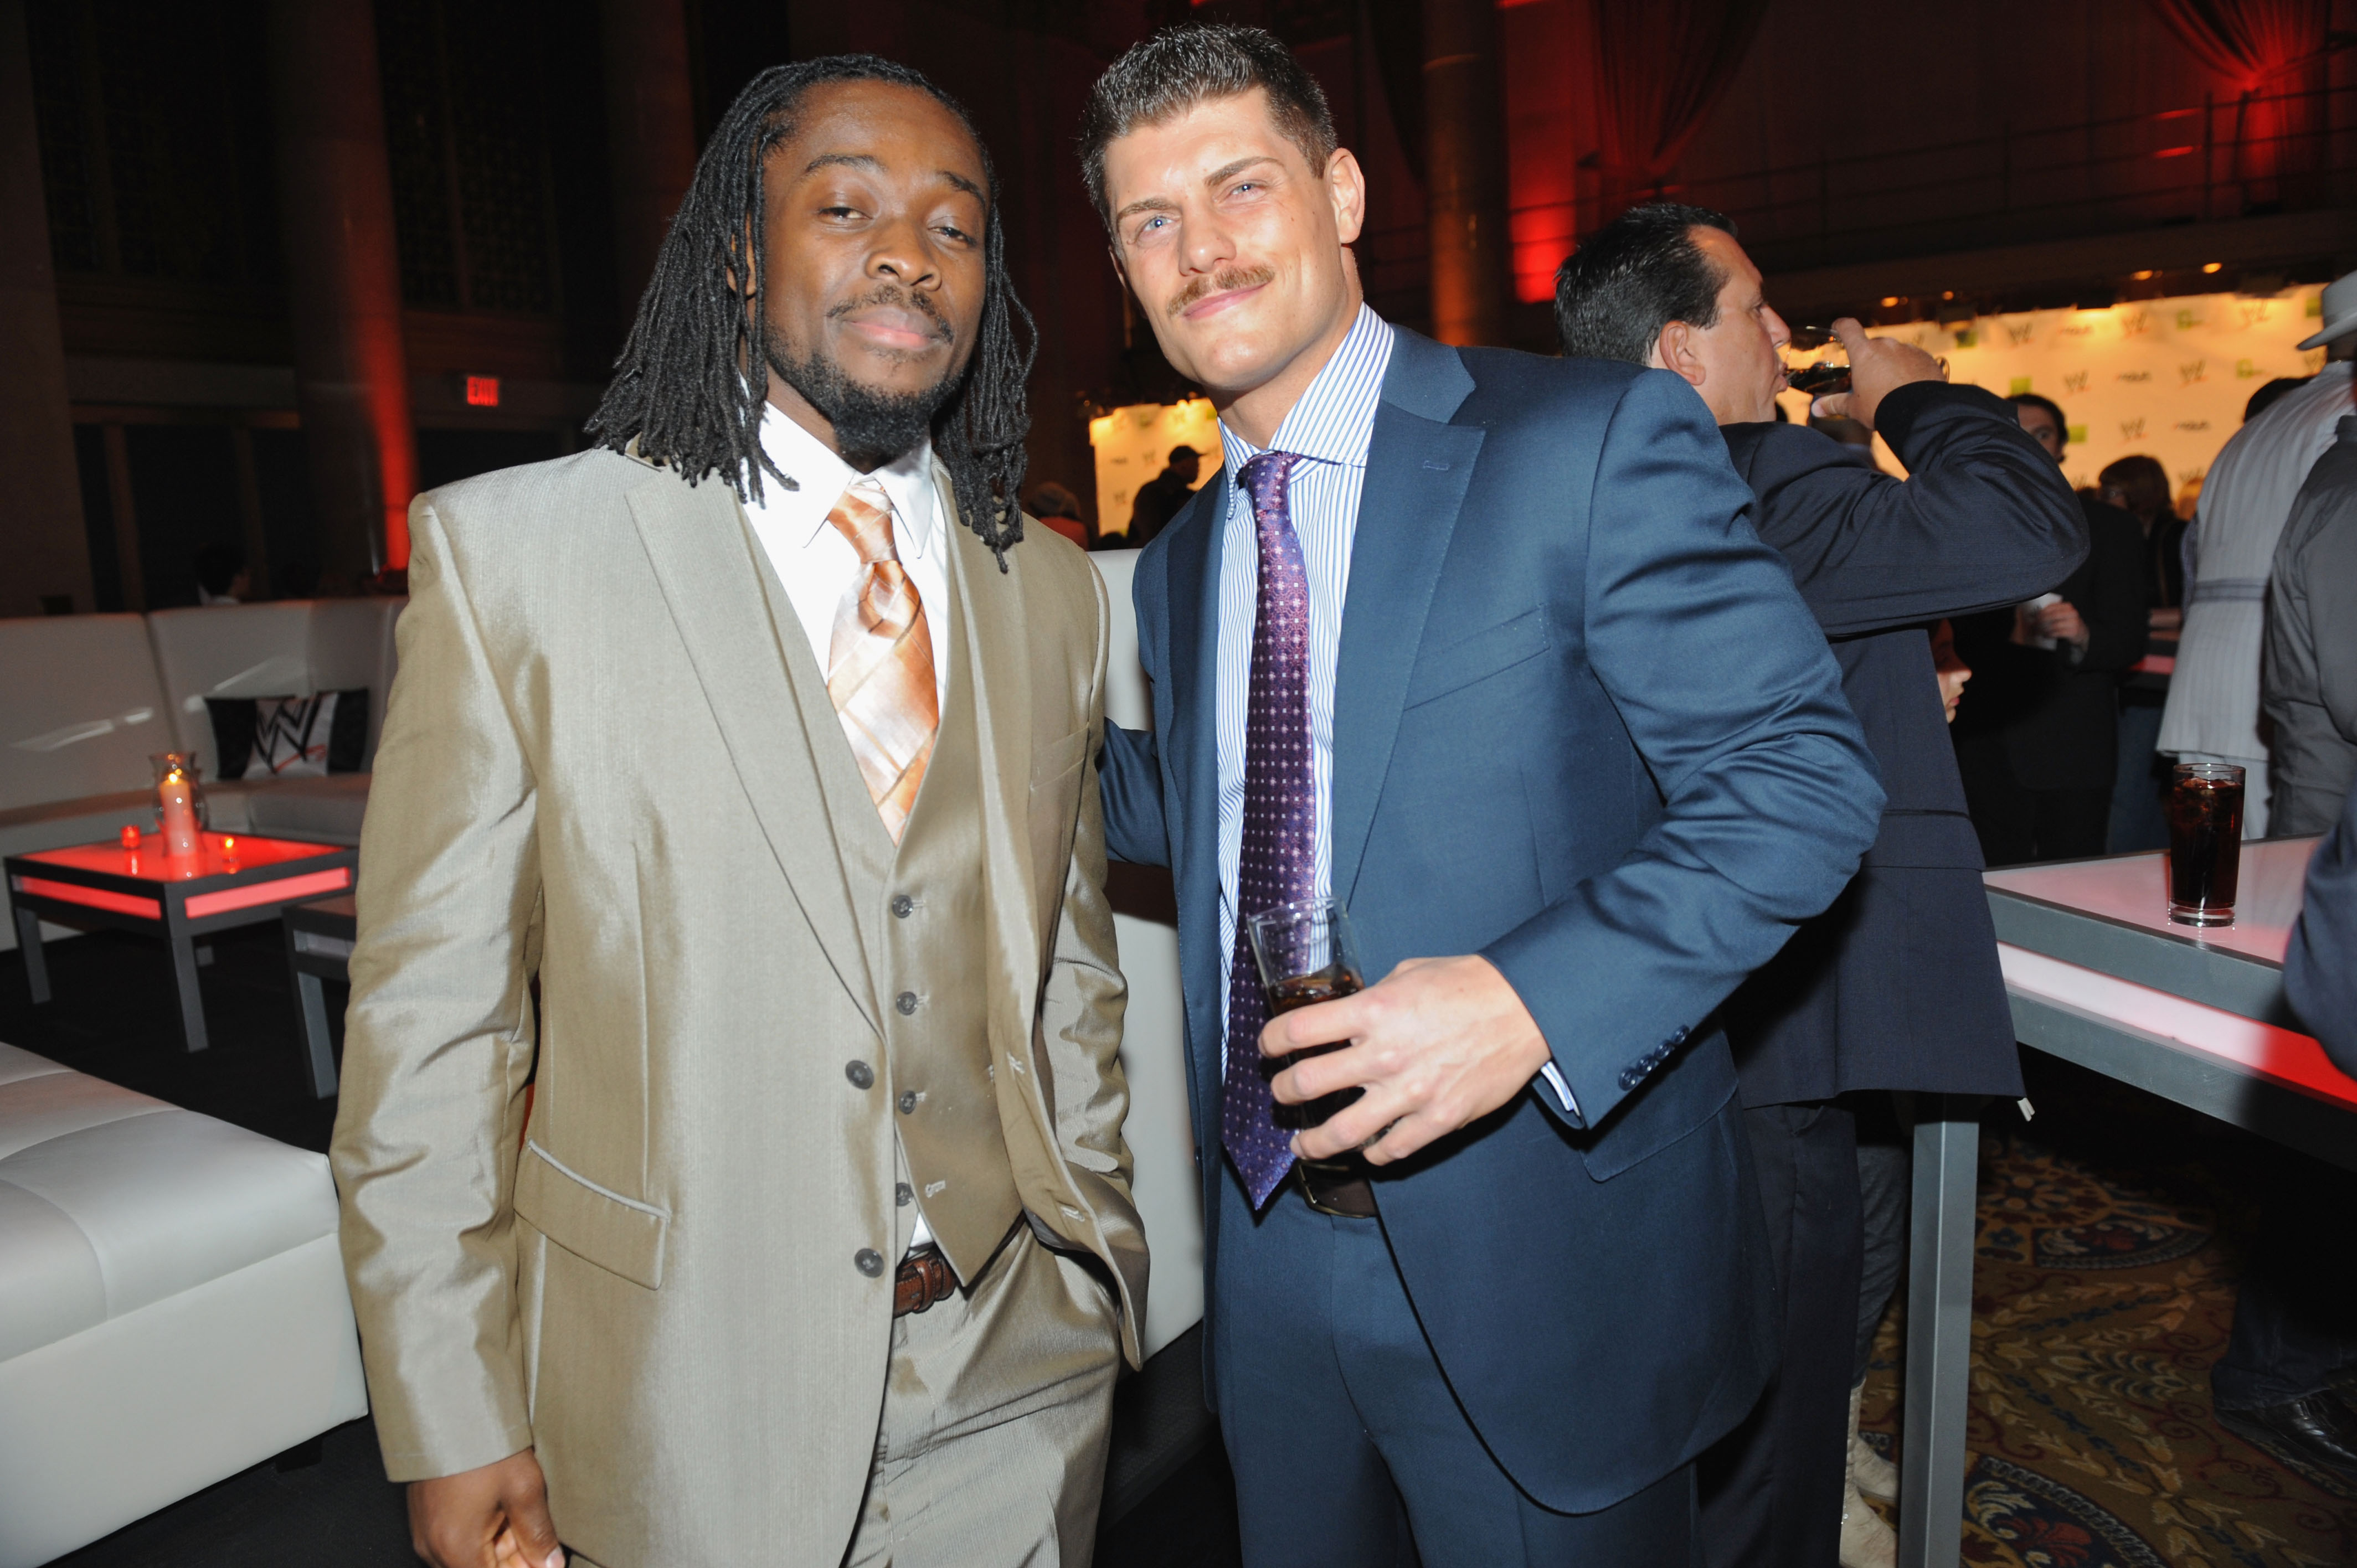 NEW YORK, NY - APRIL 04: WWE Superstars Kofi Kingston and Cody Rhodes attend WWE Superstars for Sandy Relief at Cipriani, Wall Street on April 4, 2013 in New York City. (Photo by Brad Barket/Getty Images for WWE)